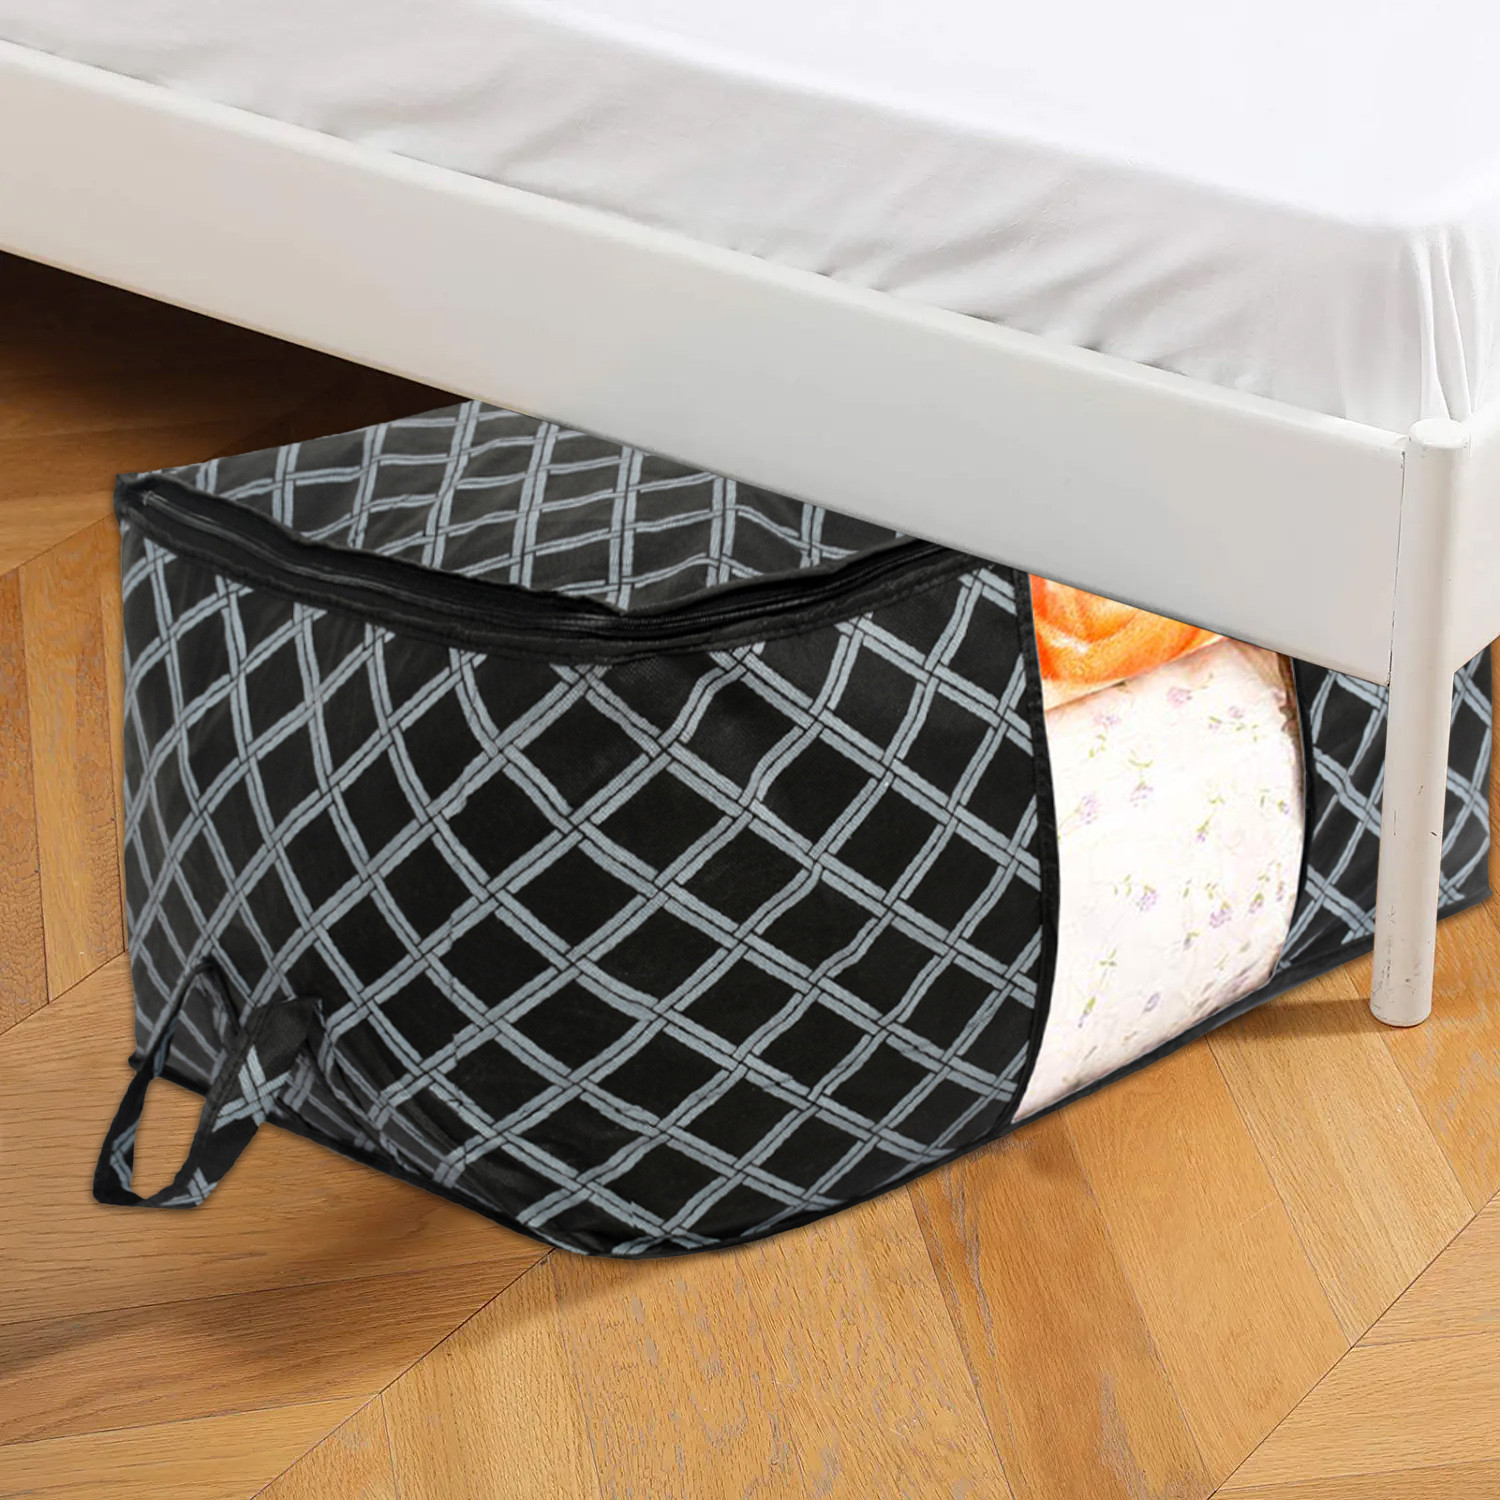 Kuber Industries Non-Woven Check Print Jumbo Underbed Storage Bag|Clothes Organizer For Clothes, Quilts, Blankets With Handle (Black)